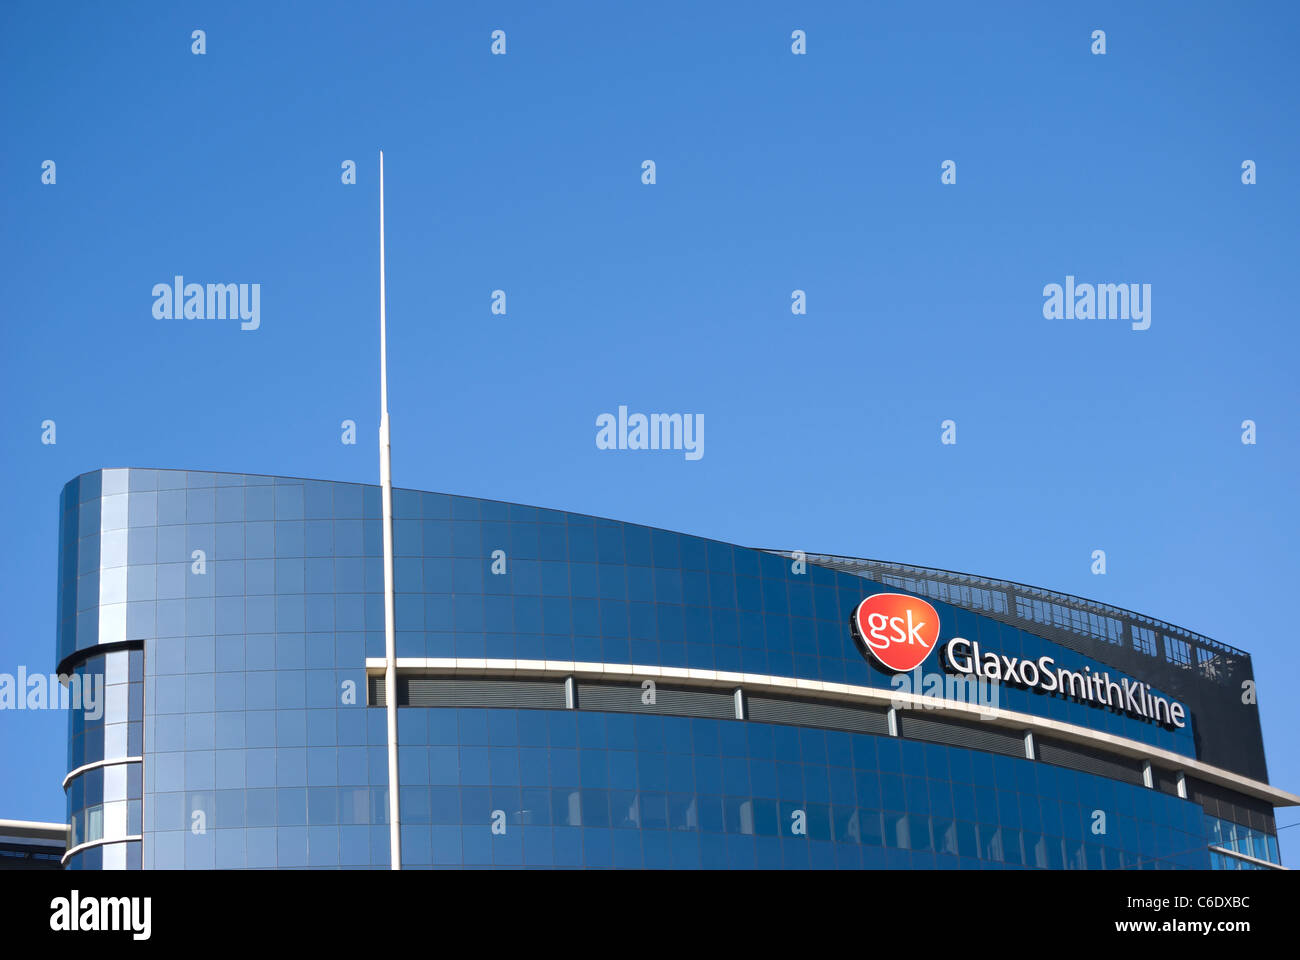 detail of the headquarters of pharmaceutical company gsk, glaxo smith kline, great west road, london, england Stock Photo